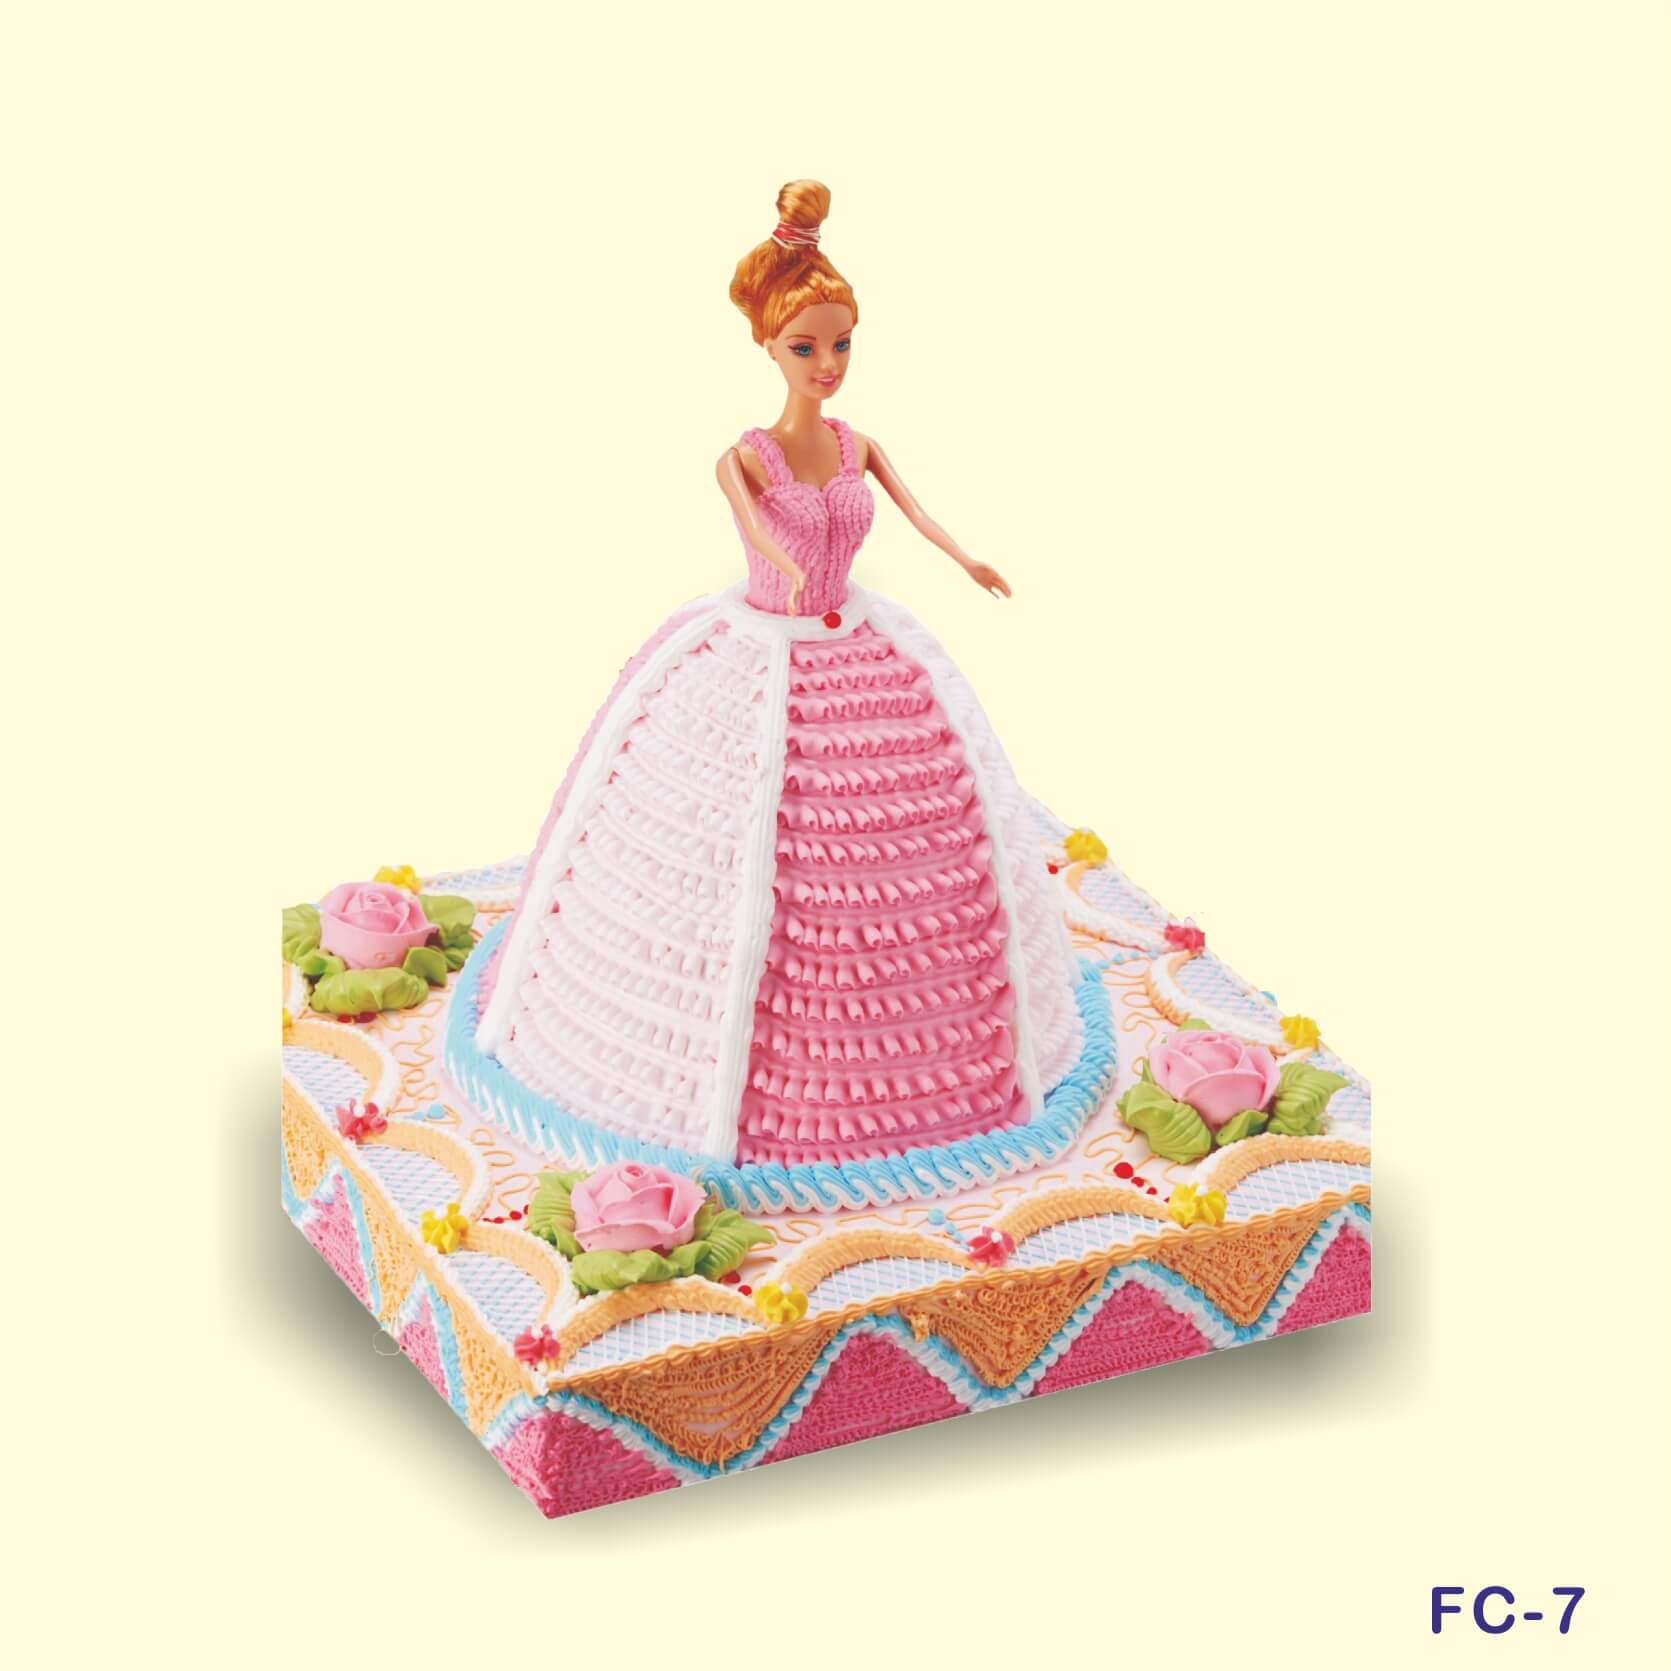 tirupaticollection Doll Cake Topper with Golden Cake Base 8